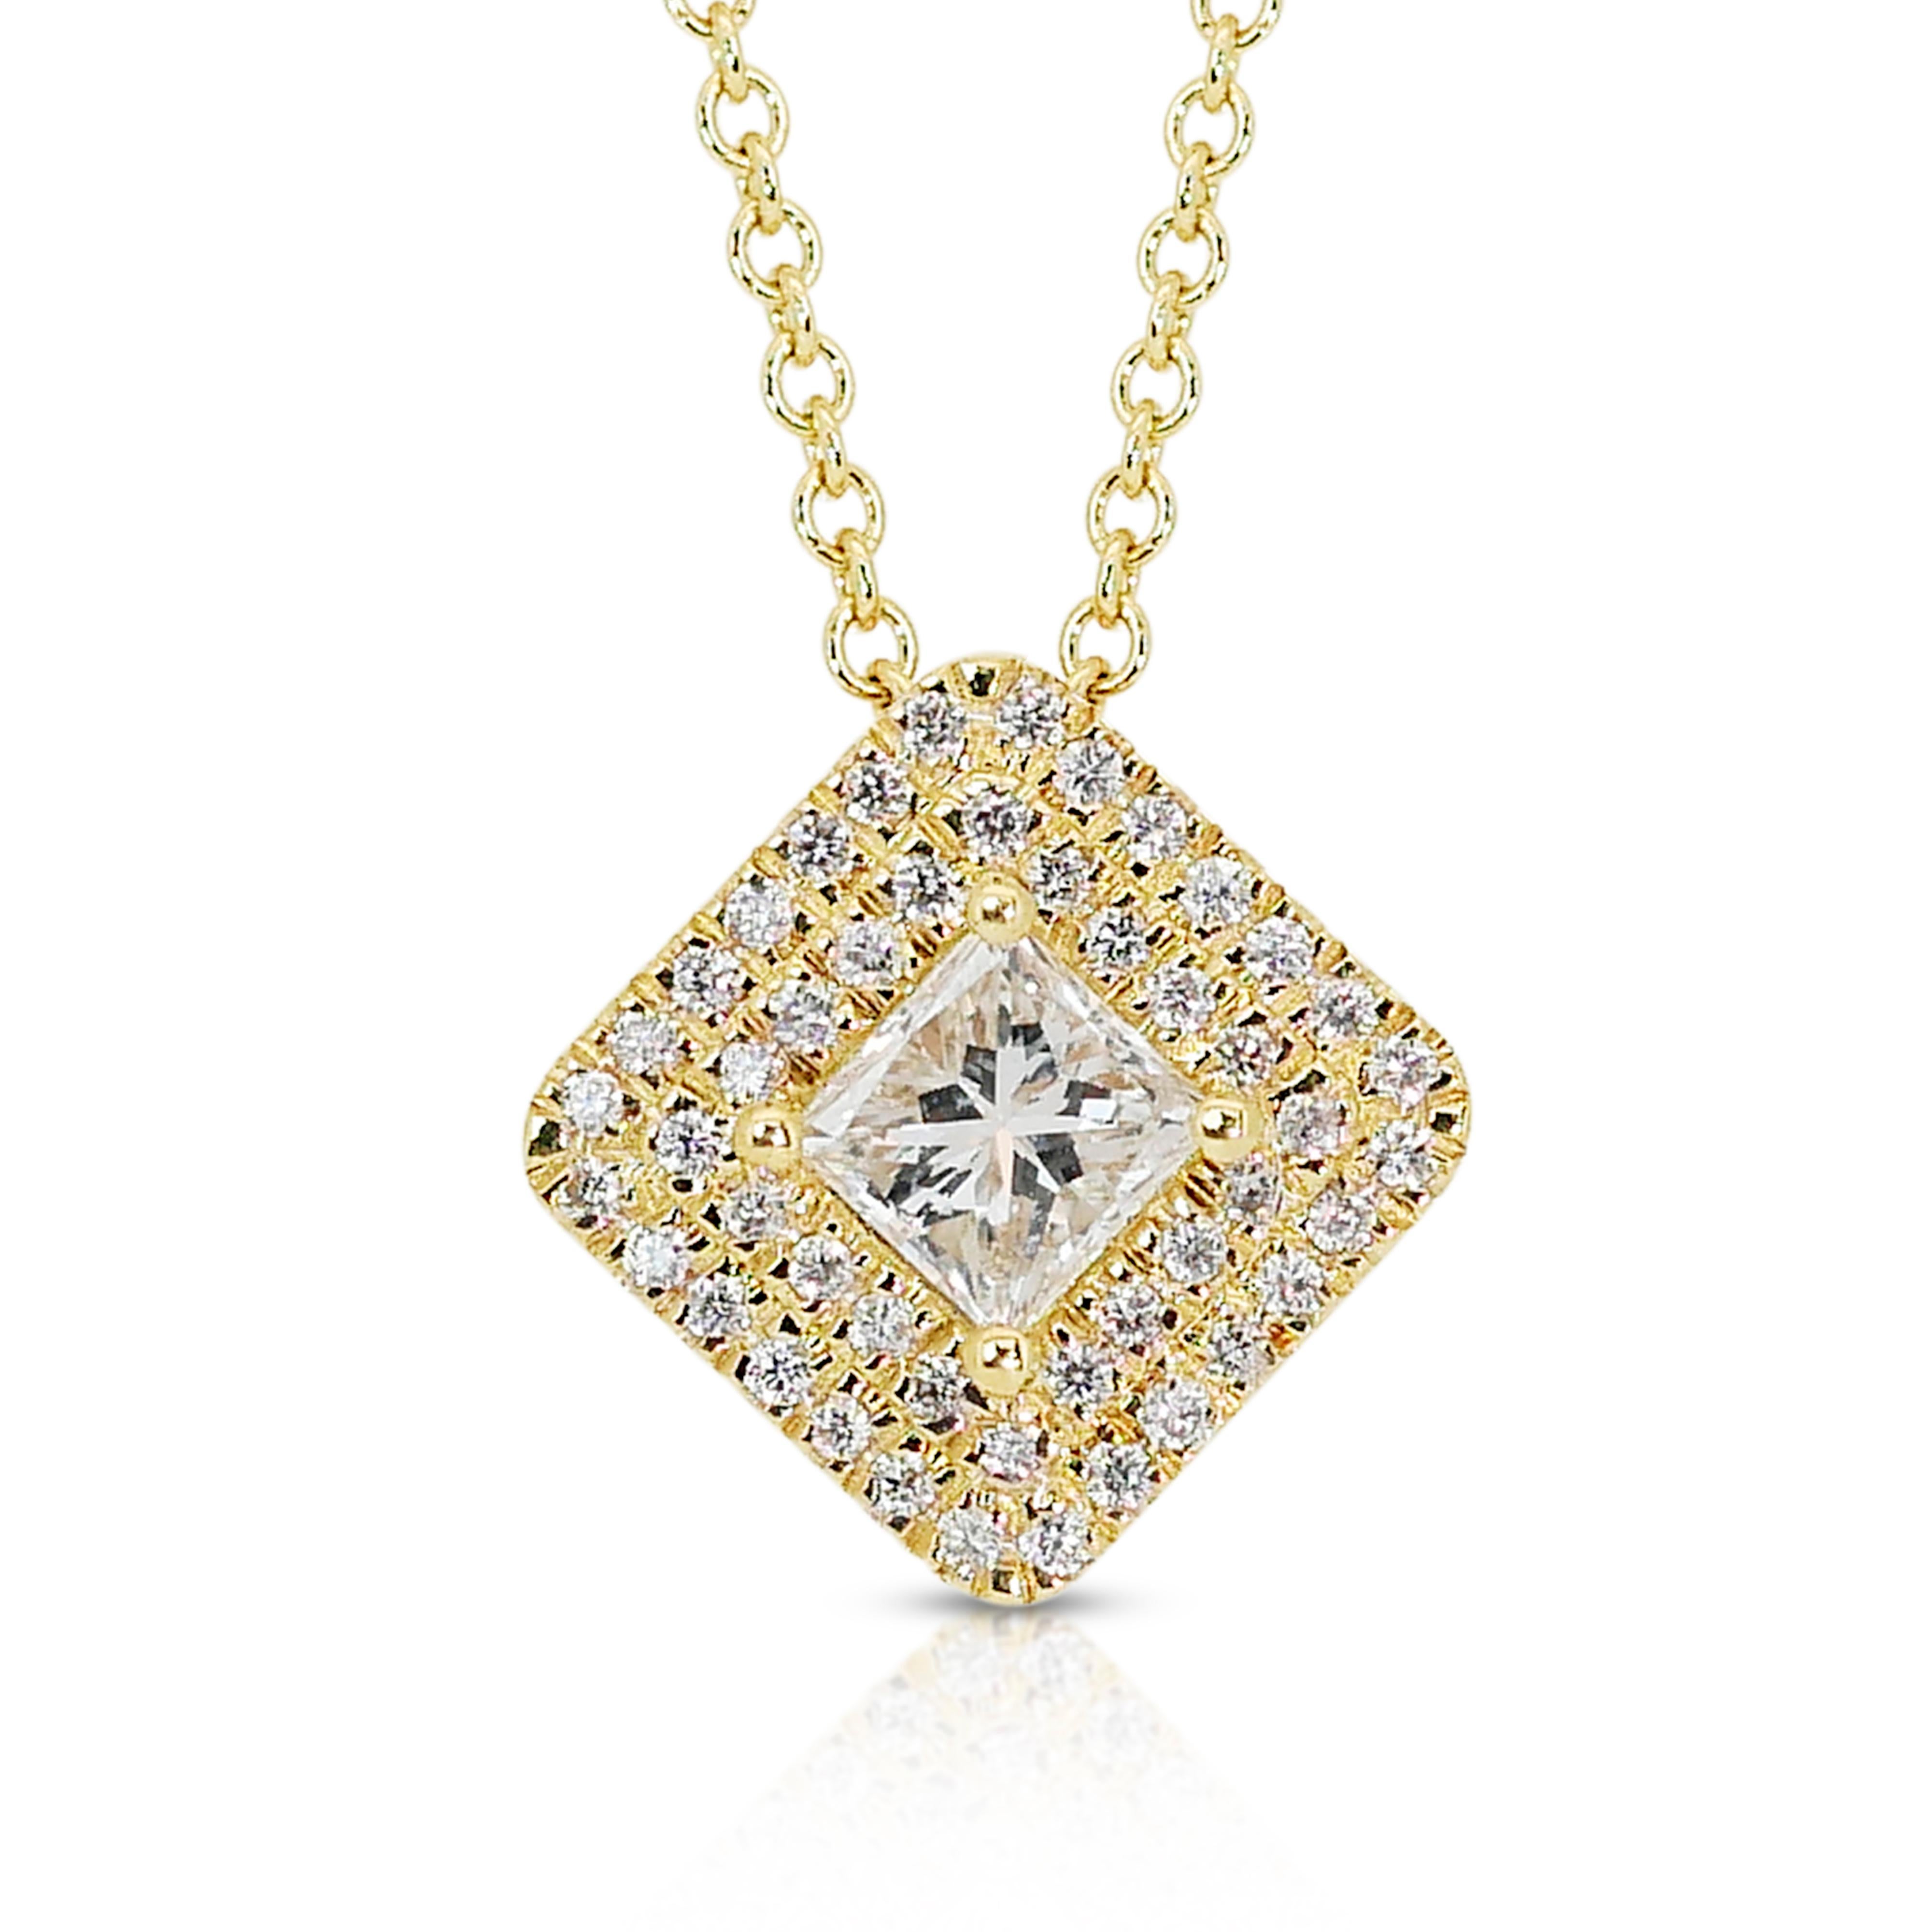 Sophisticated 0.60ct Diamonds Double Halo Necklace in 18k Yellow Gold - IGI Certified

This elegant double halo necklace in 18k yellow gold features a 0.40-carat princess cut diamond that radiates sophisticated charm with its color and clarity.